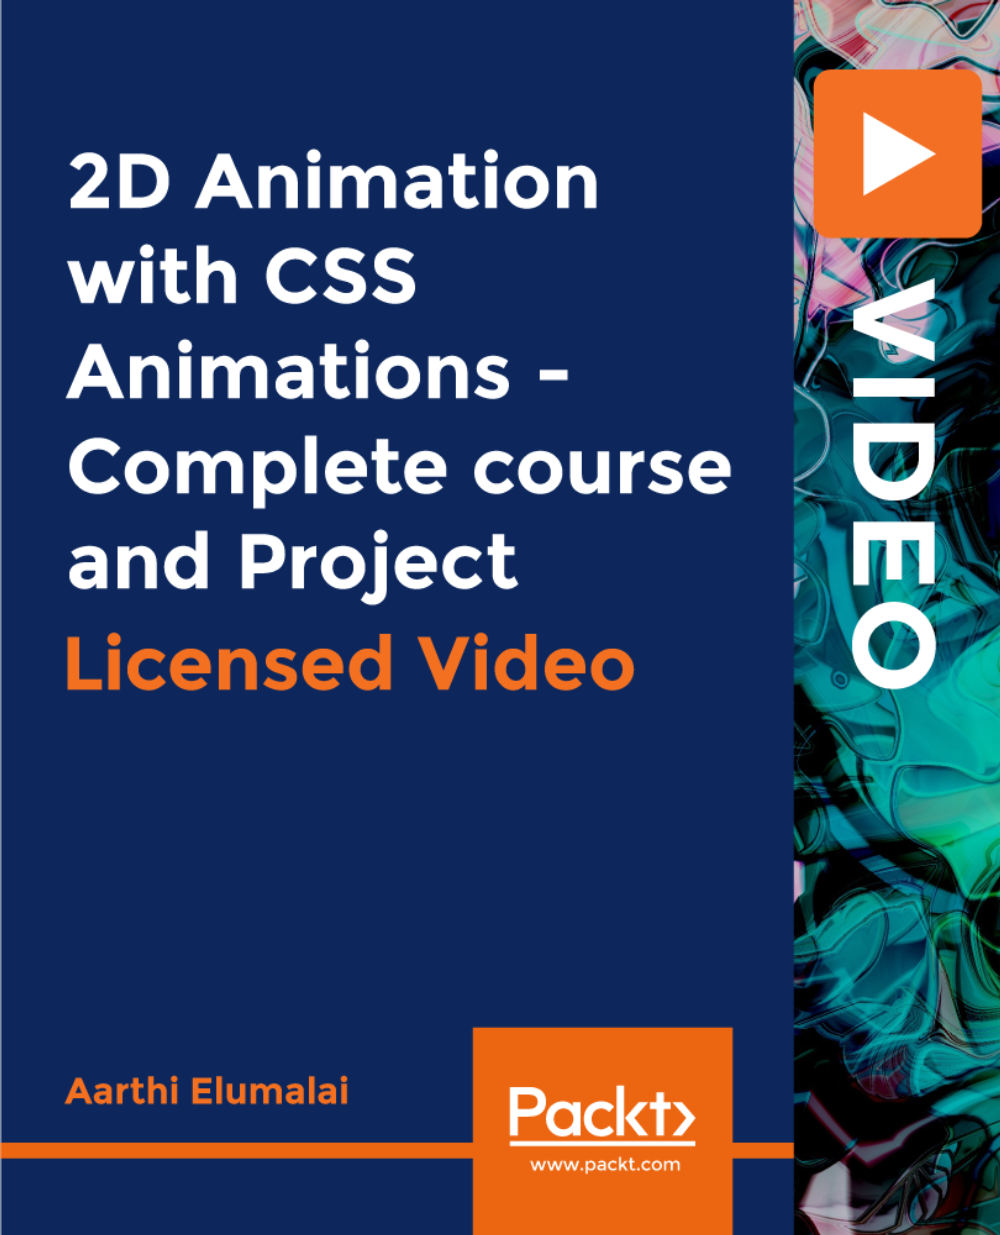 2D Animation with CSS Animations - Complete course and Project